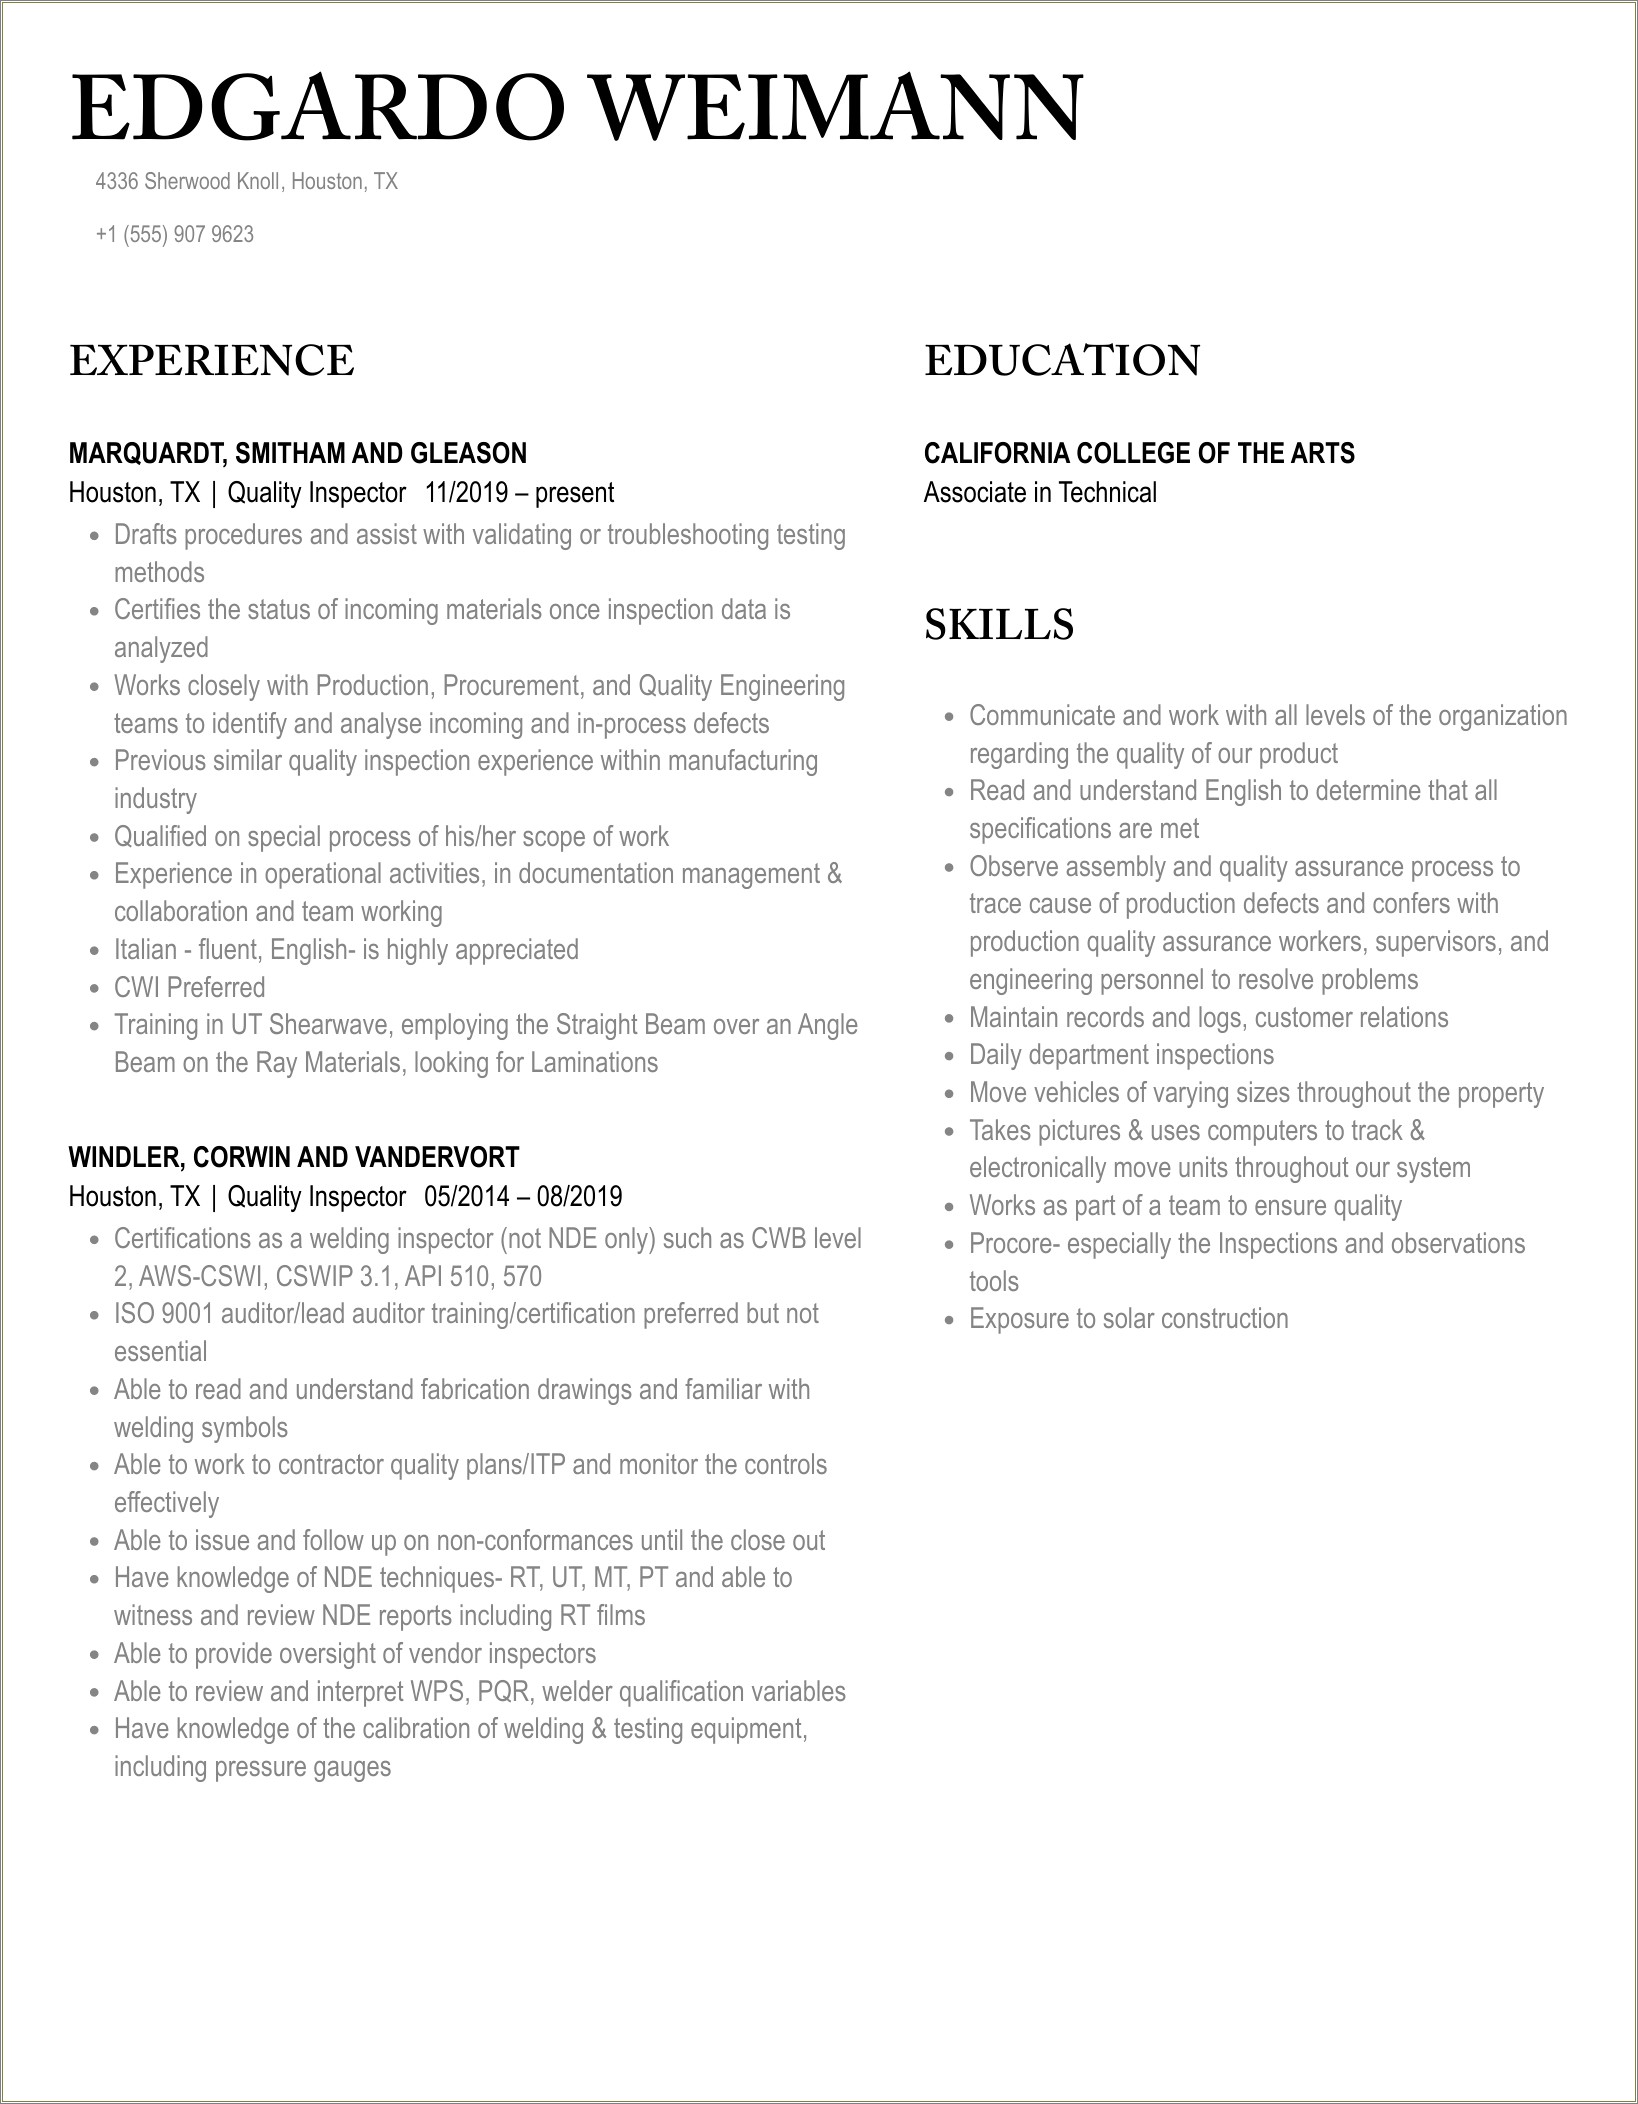 Sample Resume For Quality Inspector For Aerospace Components